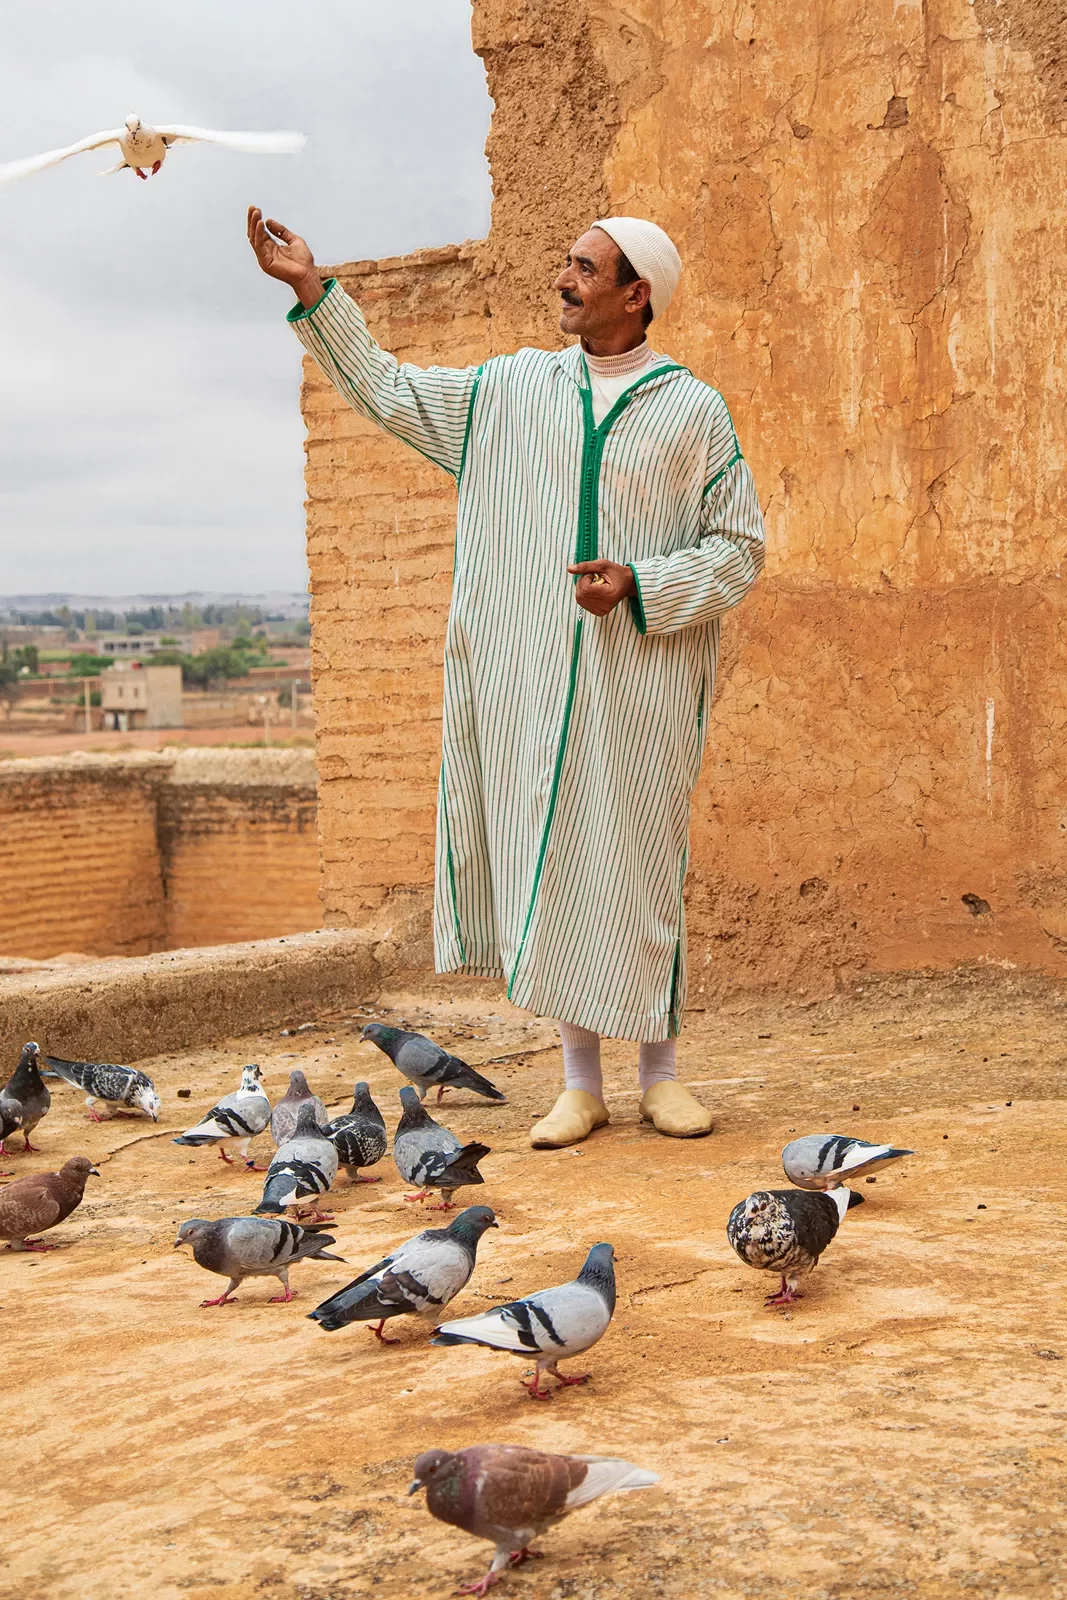 Man in kaftan surrounded by pigeons looks up at bird flying by